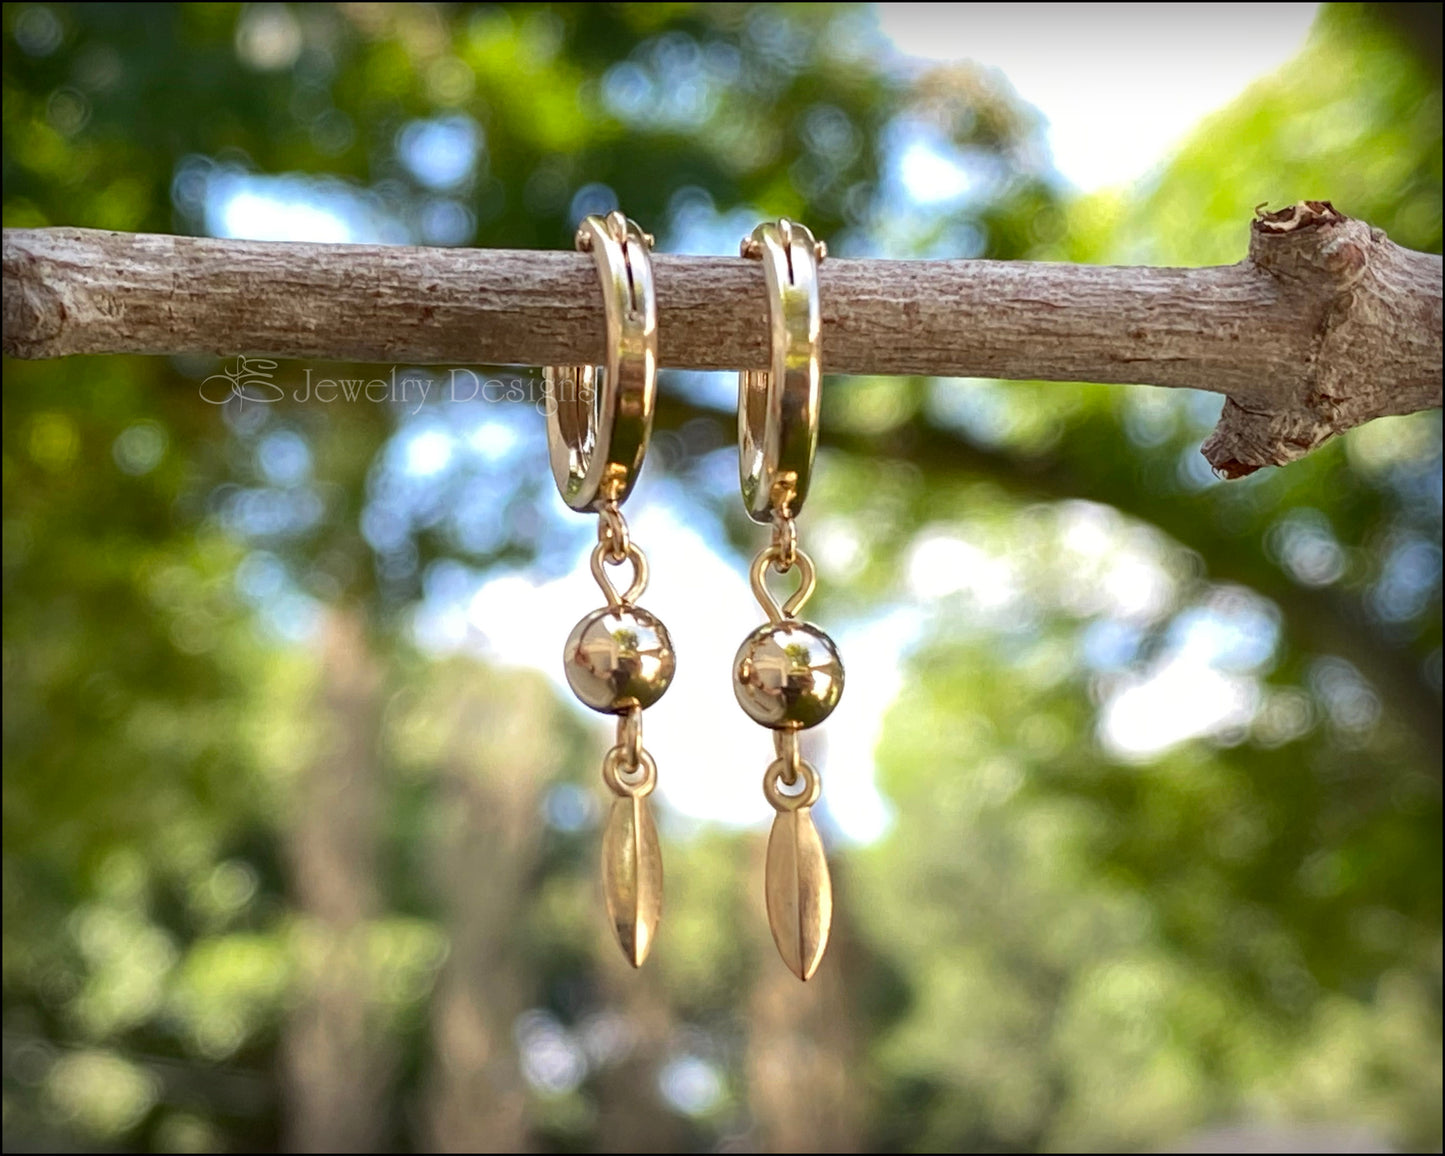 Gold Leaf Dangle Hoops - LE Jewelry Designs